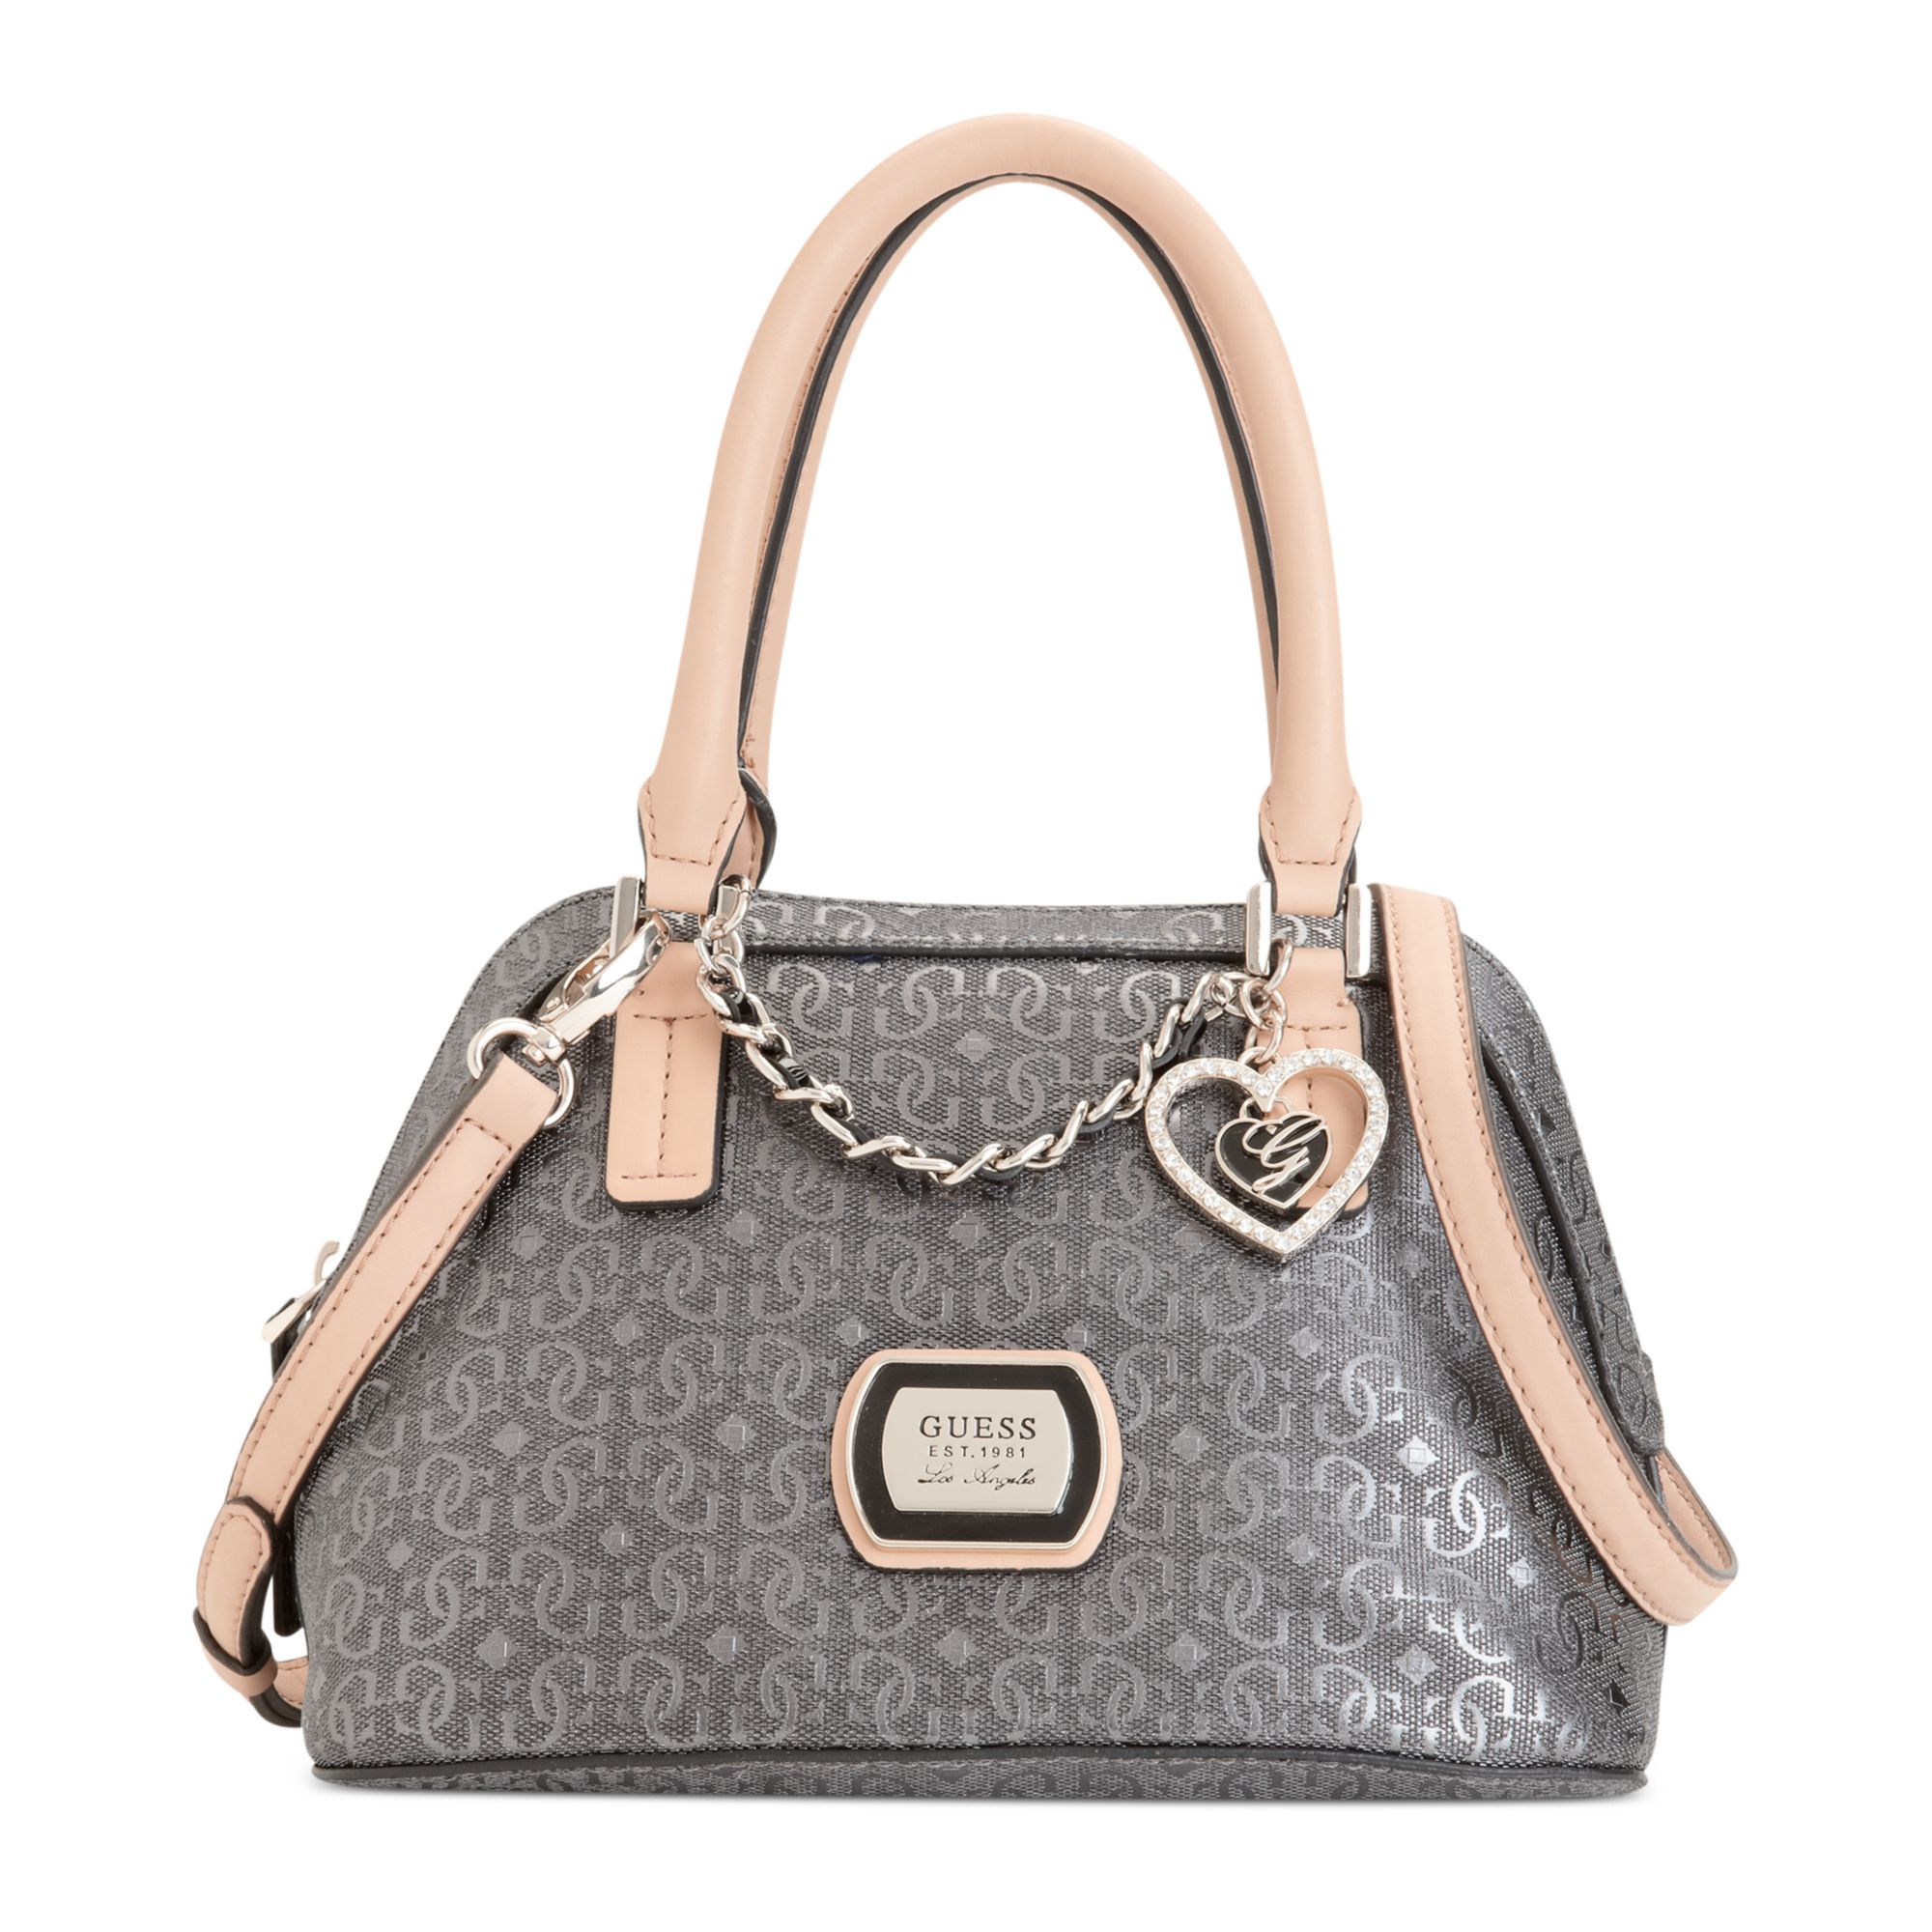 Lyst - Guess Guess Handbag Margeaux Amour Dome Satchel in Metallic